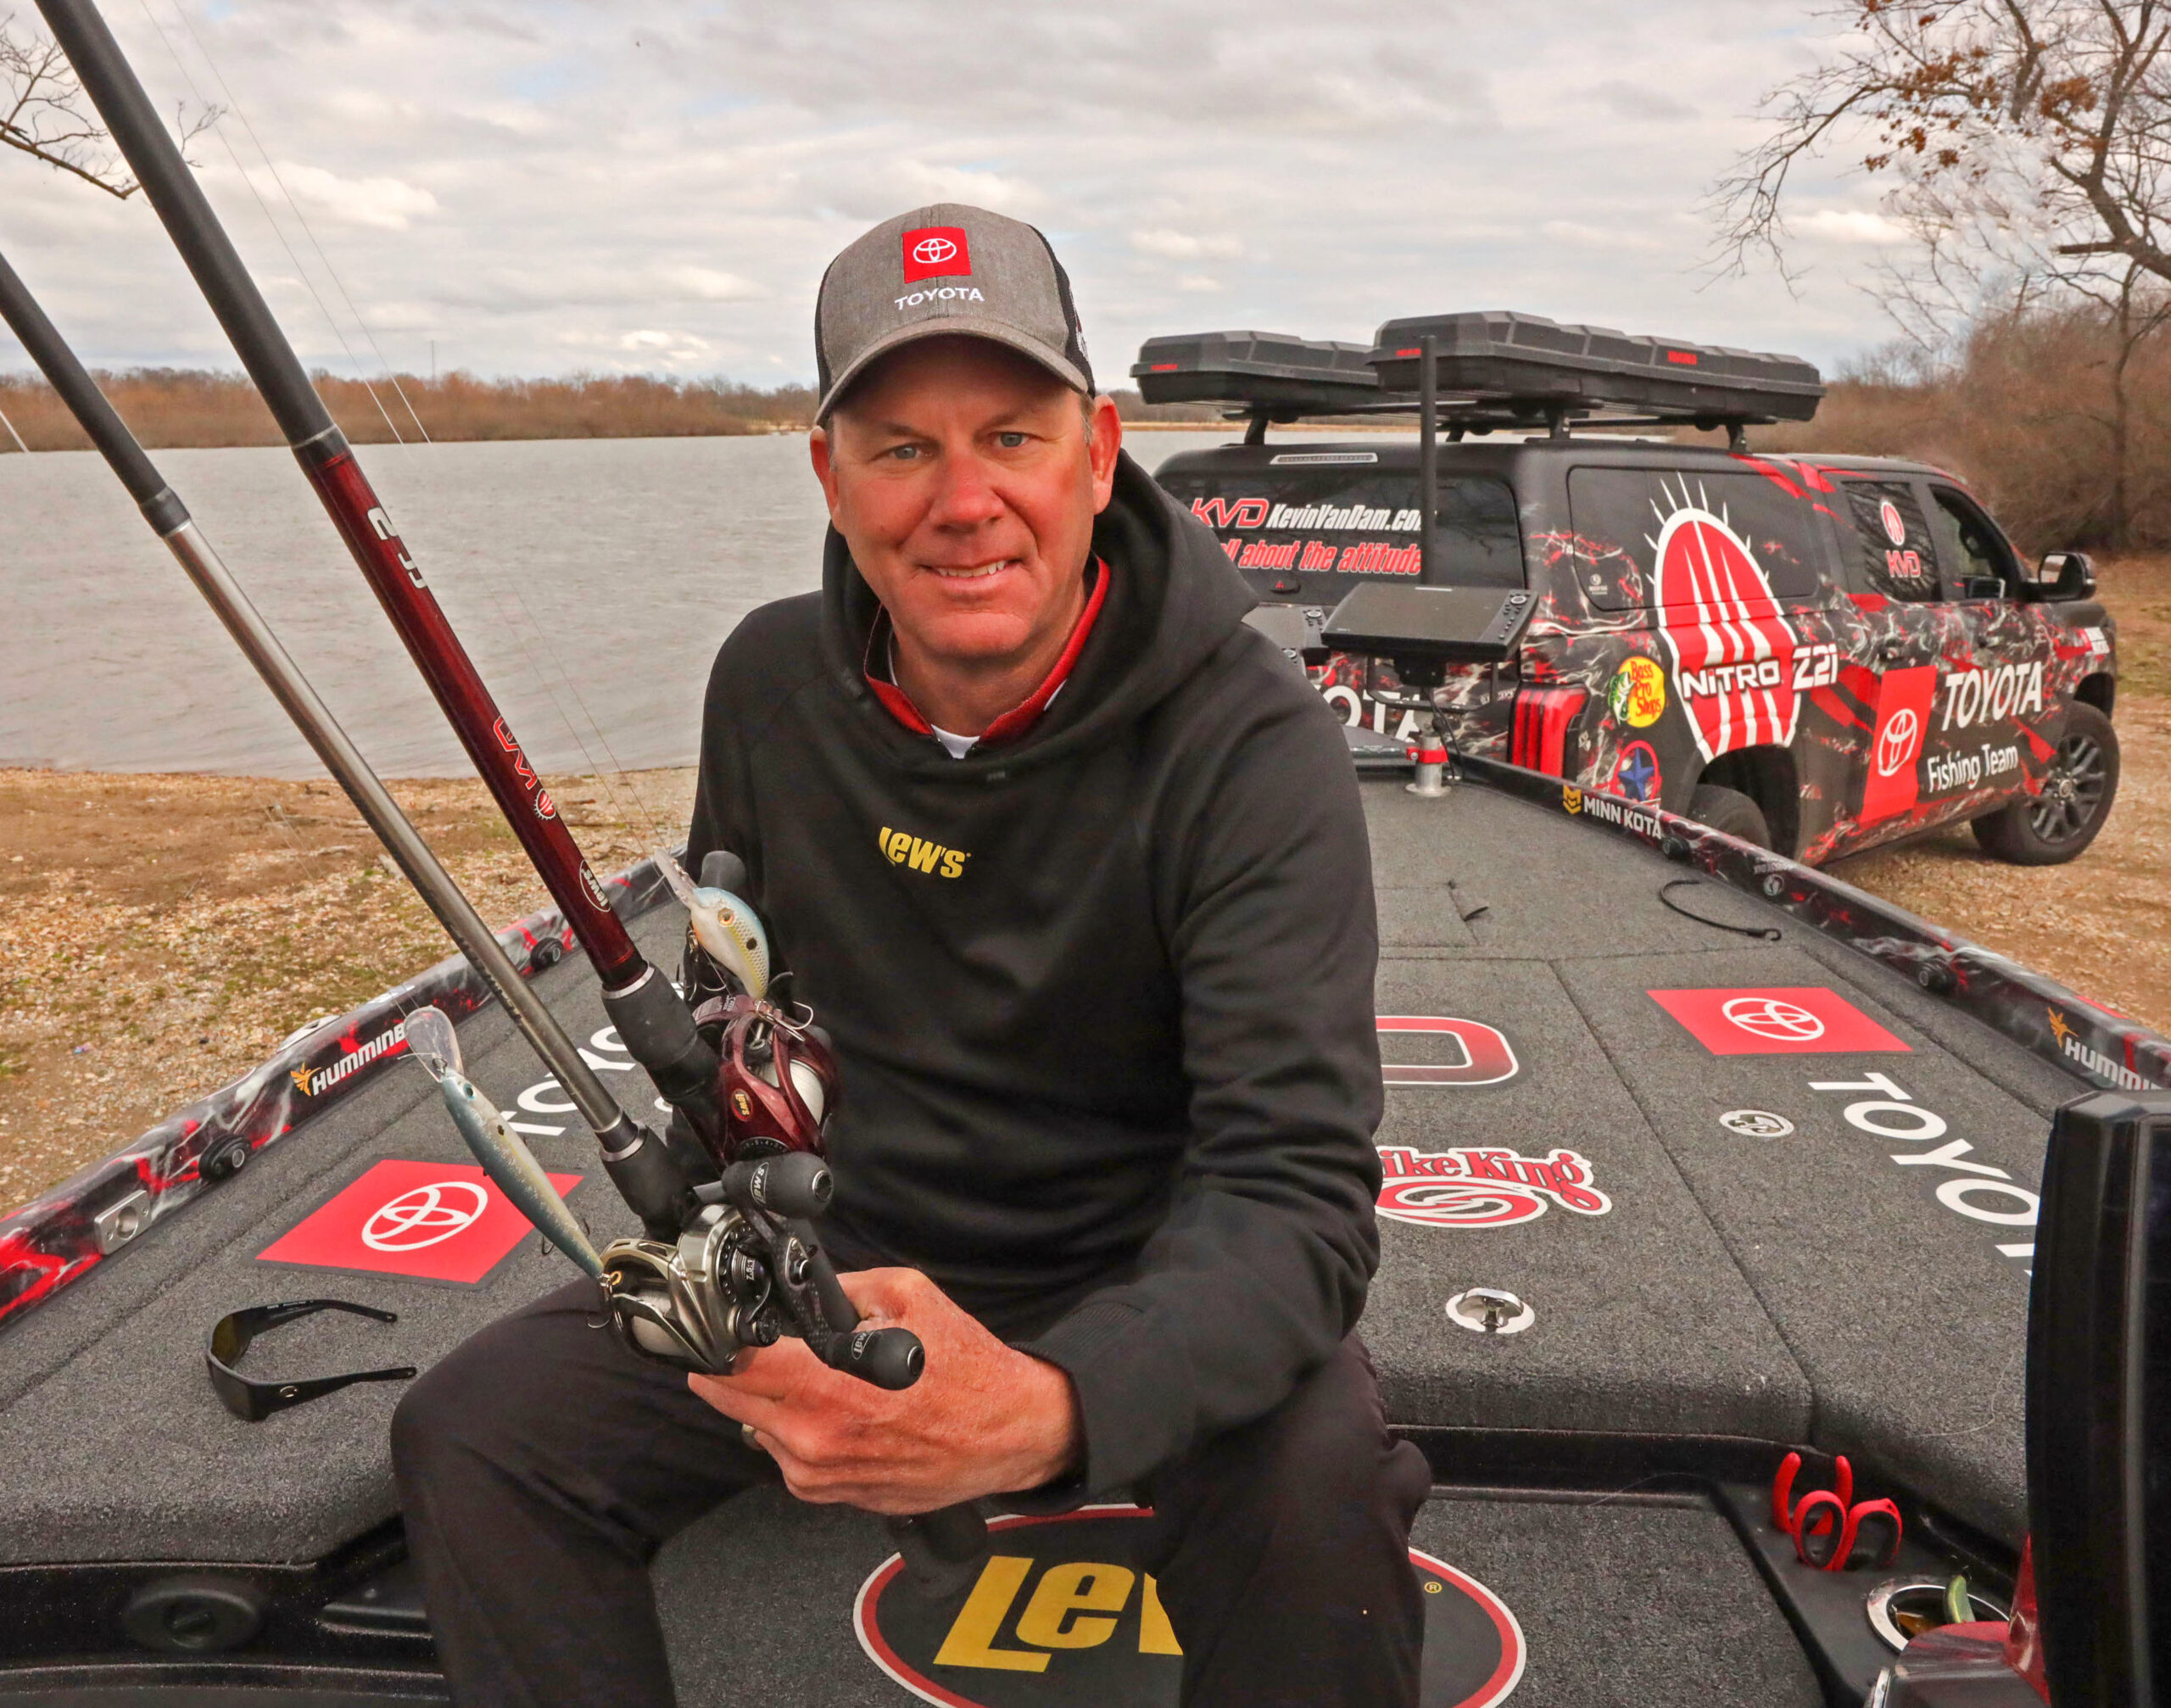 Kevin VanDam at REDCREST: Gracious and Giving in Defeat - Major